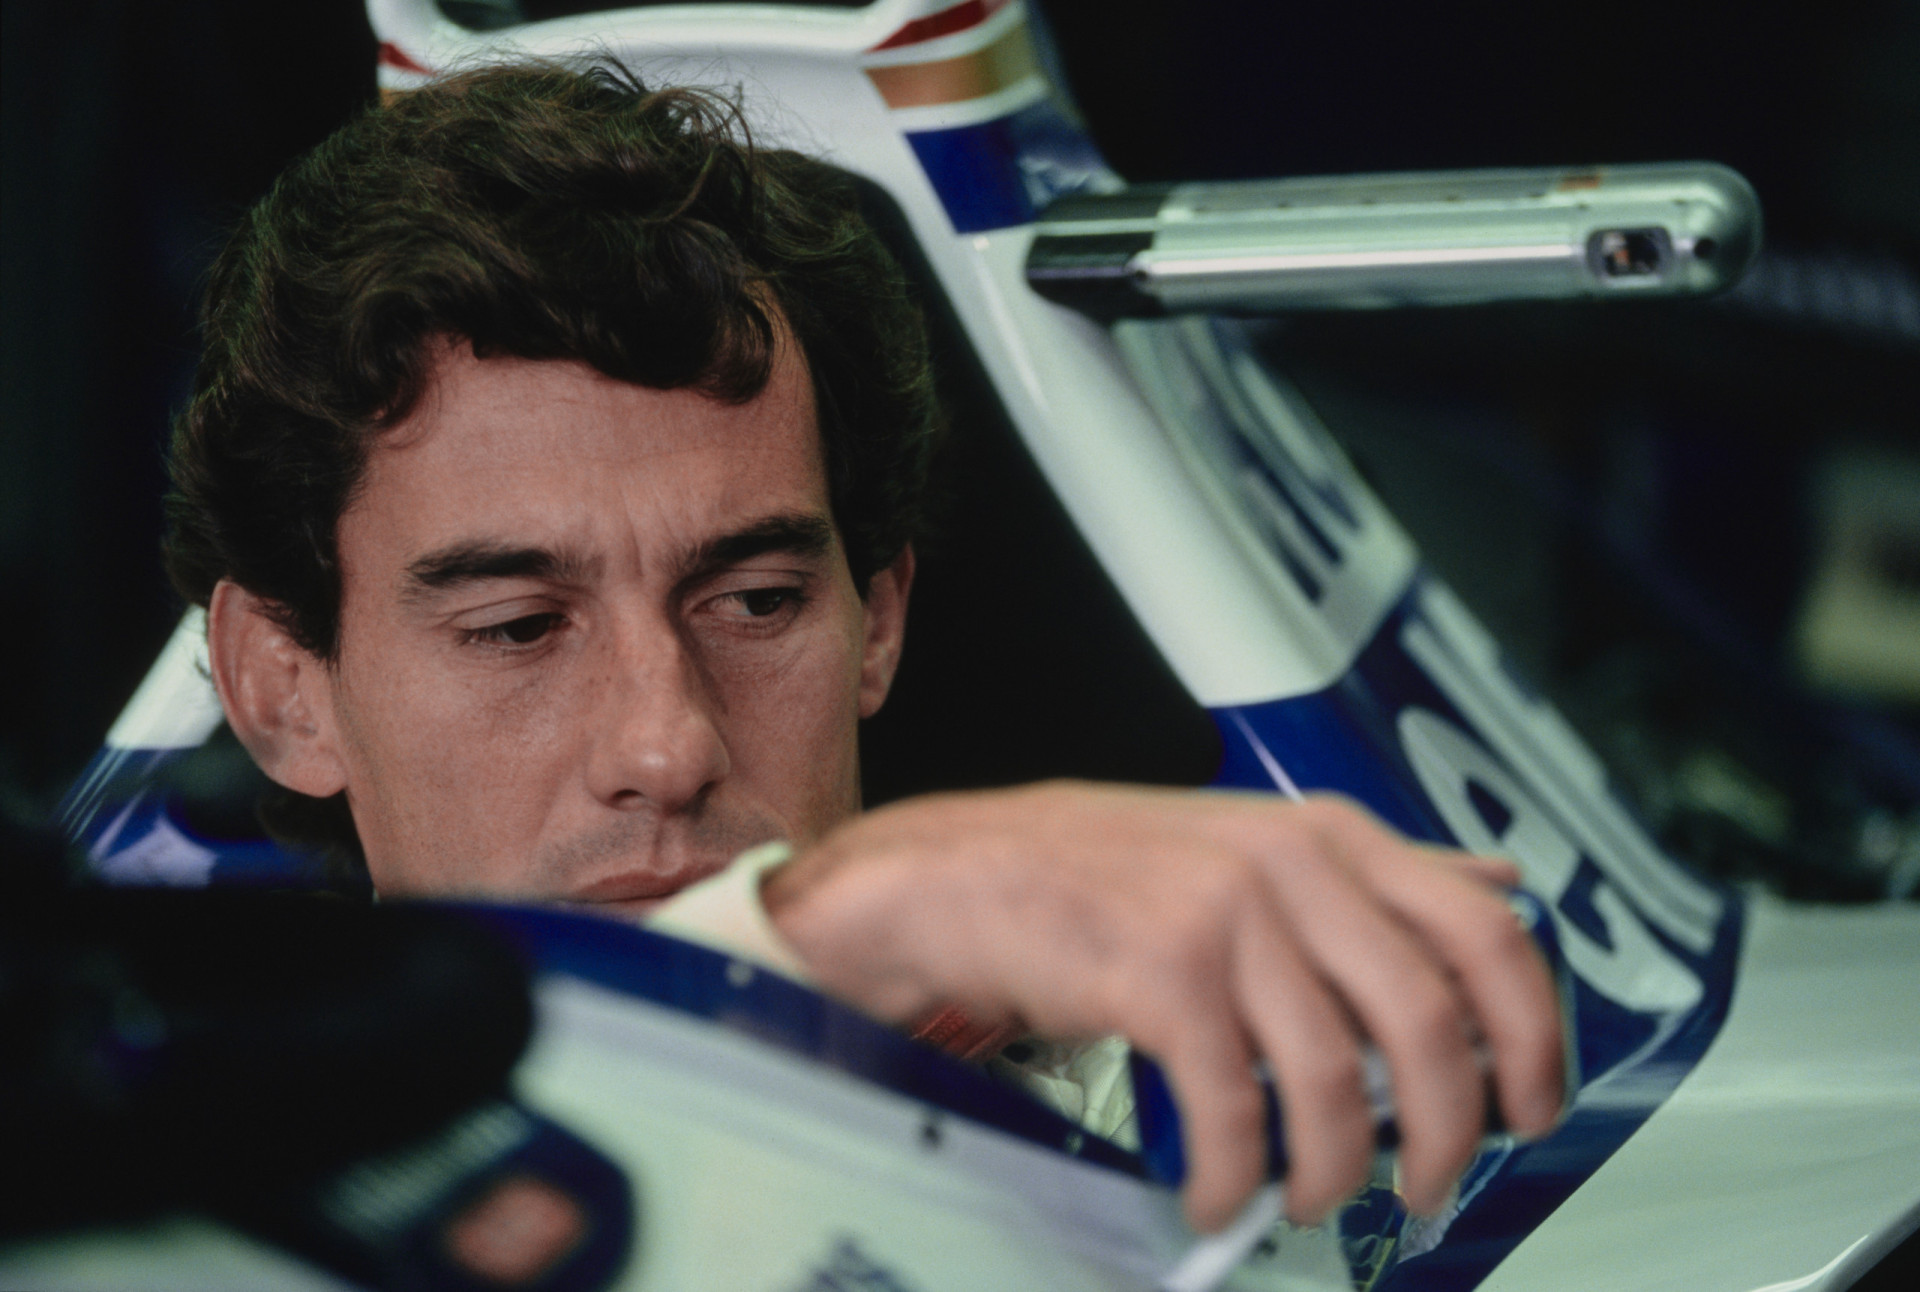 <p>For 1994, Senna was able to finally join the Williams team after Prost retired. Speaking on the eve of the season, Senna eerily predicted the events of May 1, 1994. "The cars are very fast and difficult to drive. It's going to be a season with lots <a href="https://www.starsinsider.com/lifestyle/527590/the-most-dangerous-sports-in-the-world" rel="noopener">accidents</a> and I'll risk saying we'll be lucky if something really serious doesn't happen."</p><p>You may also like:<a href="https://www.starsinsider.com/n/498054?utm_source=msn.com&utm_medium=display&utm_campaign=referral_description&utm_content=703485en-us"> Actors you didn't realize may never act again</a></p>